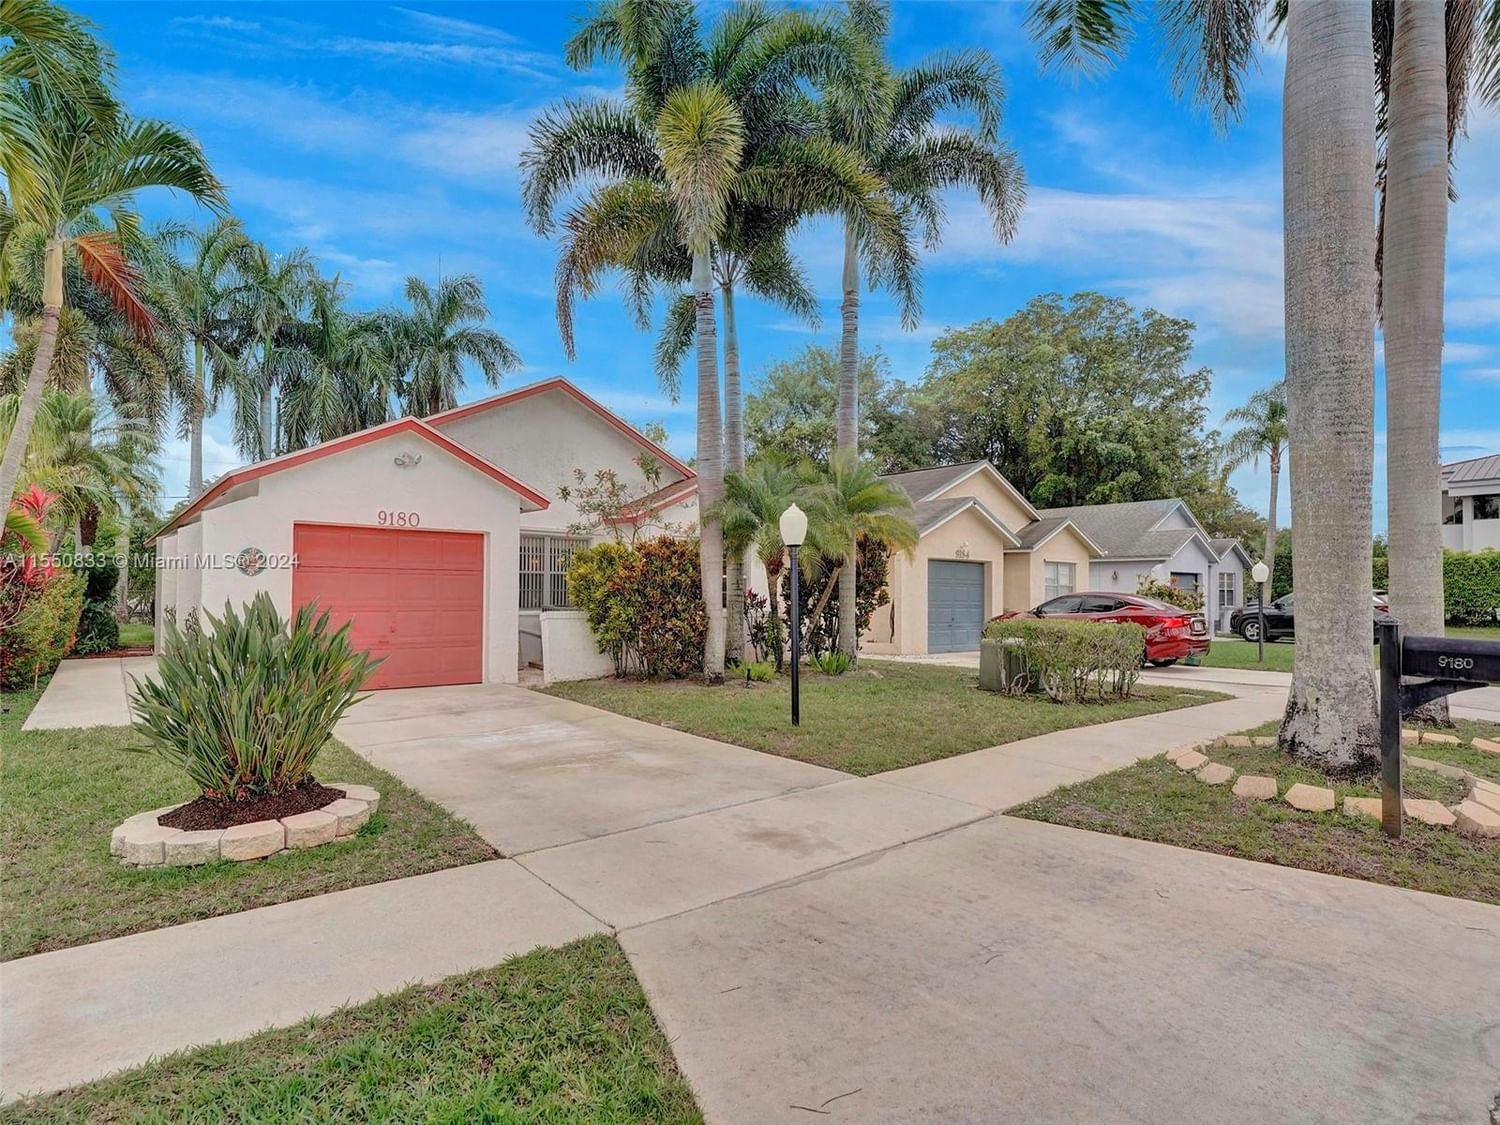 Real estate property located at 9180 Pine Springs Dr, Palm Beach County, PINE SPRINGS 2, Boca Raton, FL